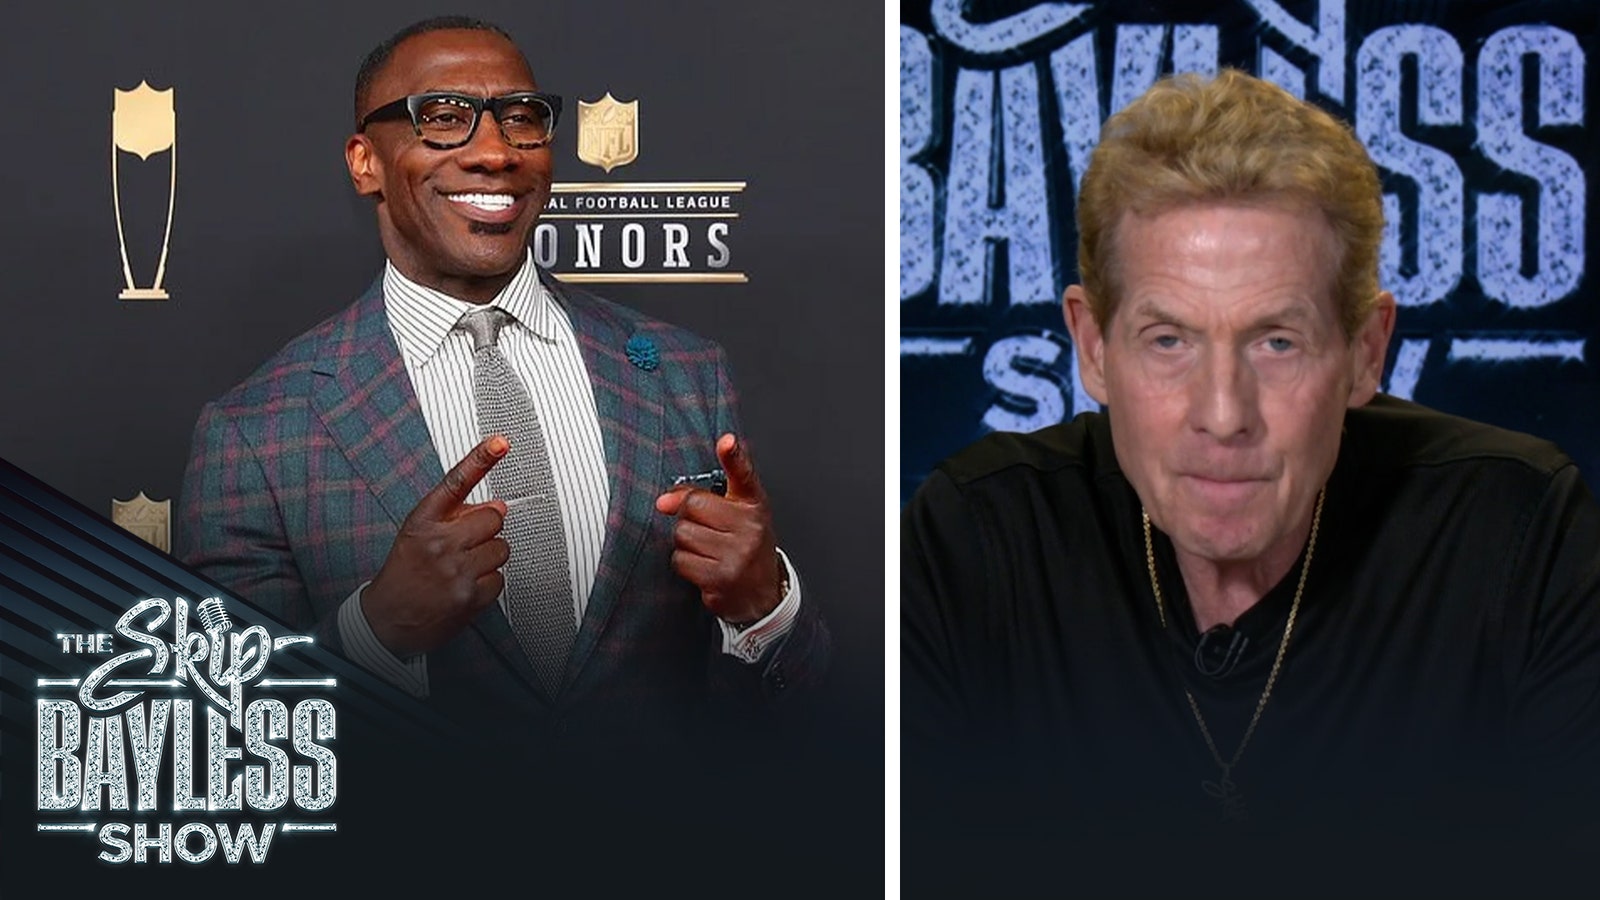 Skip Bayless discusses Shannon Sharpe's departure from "Undisputed"